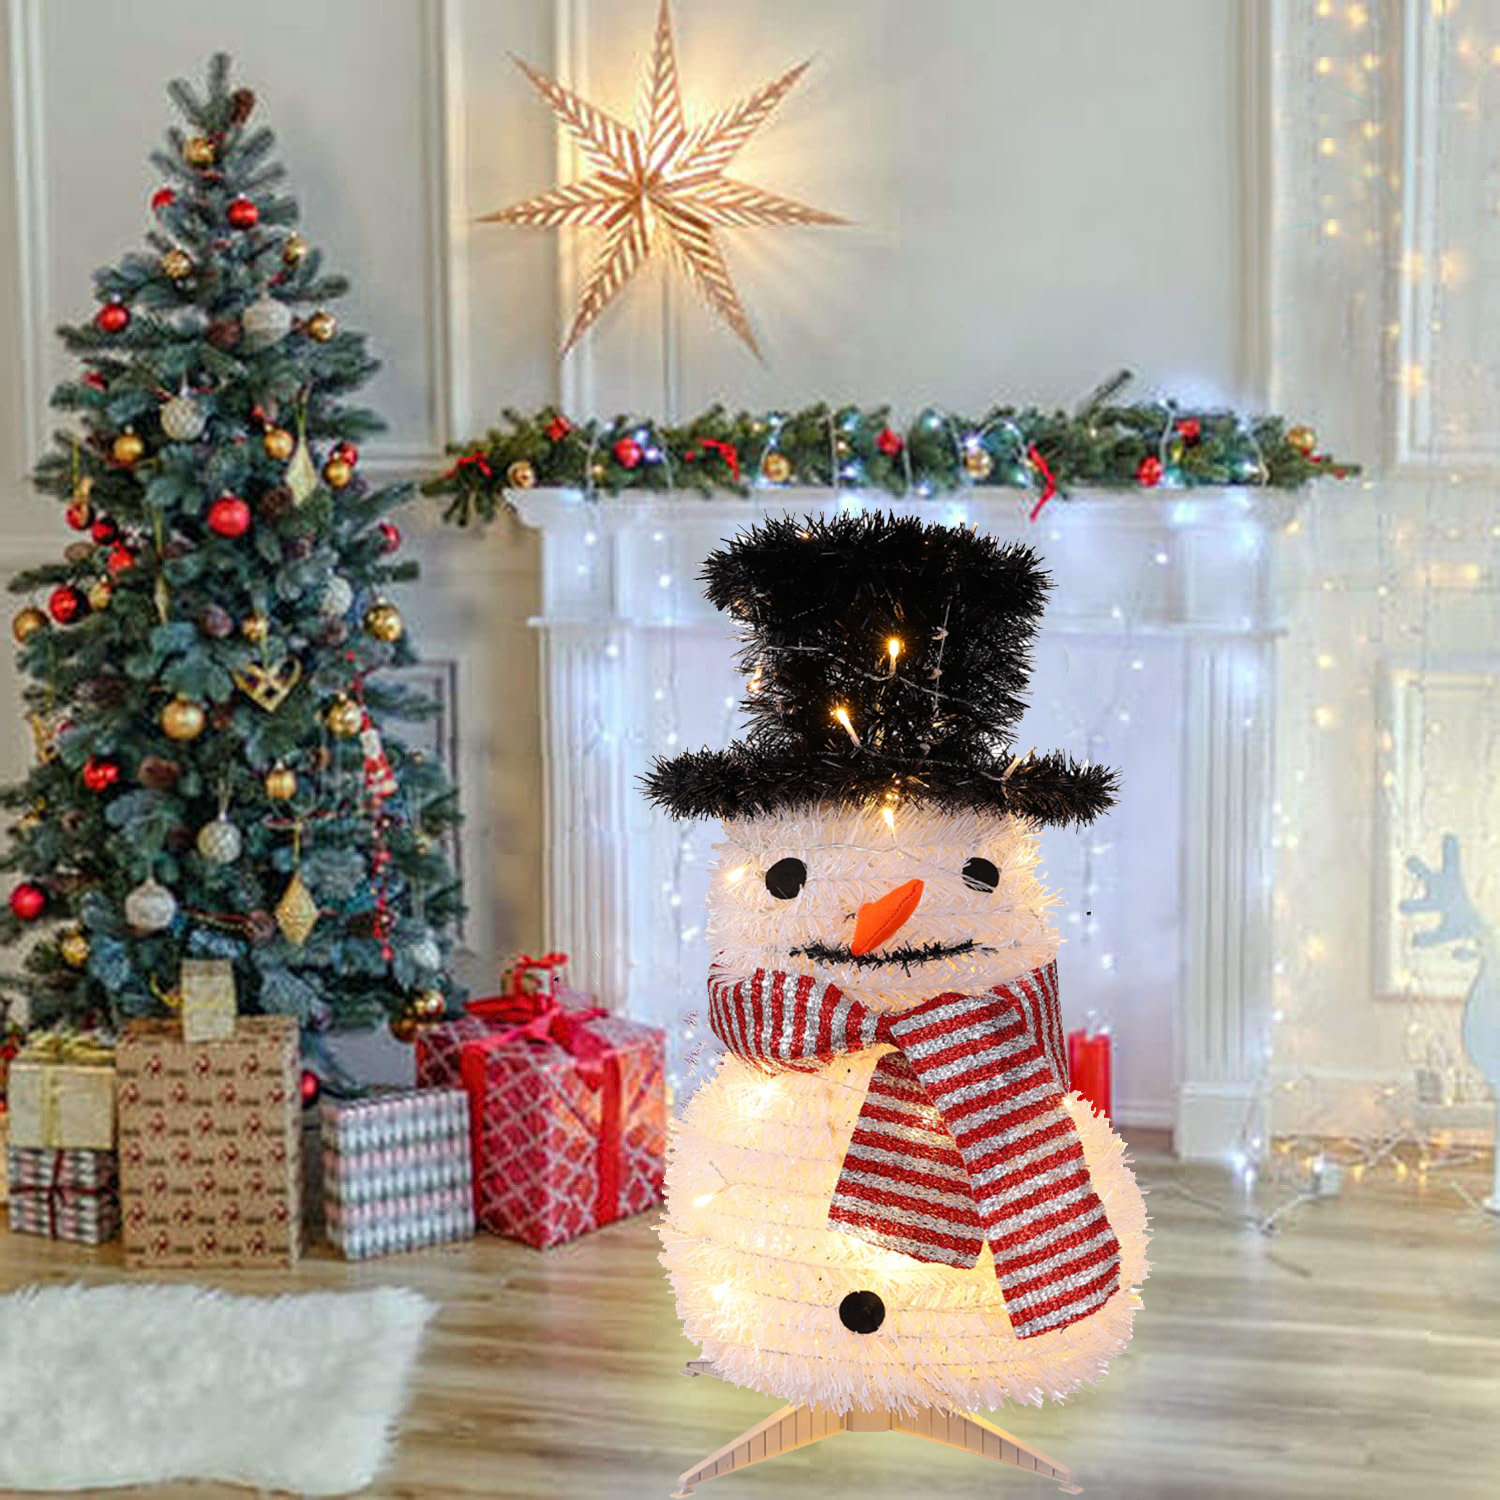 VP Home Glowing Star Snowman Decor LED Holiday Light Up Figurines